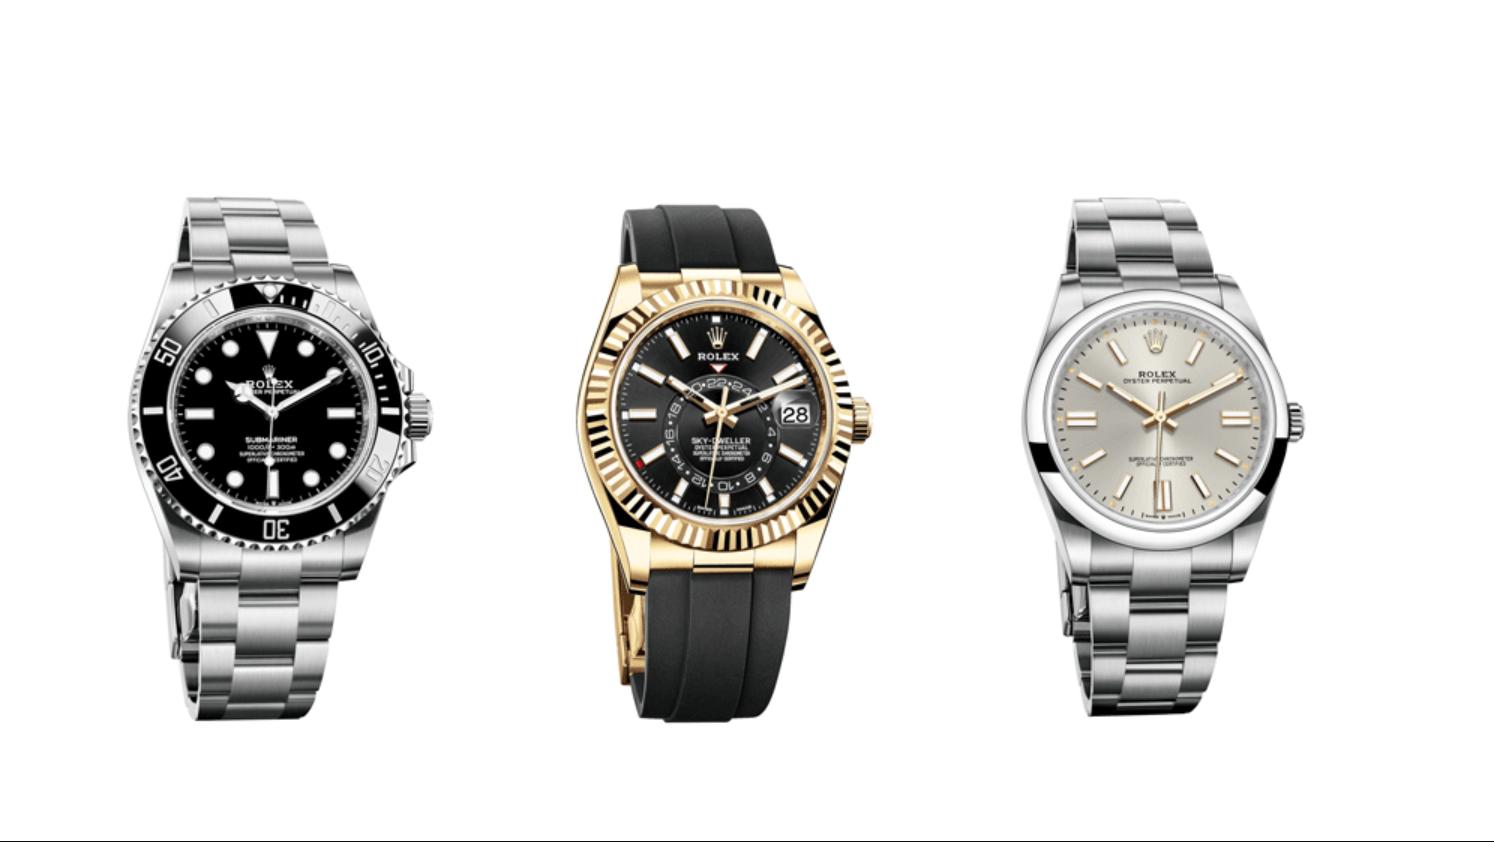 Meet the New Oyster Perpetual and Other Rolex Models of 2020